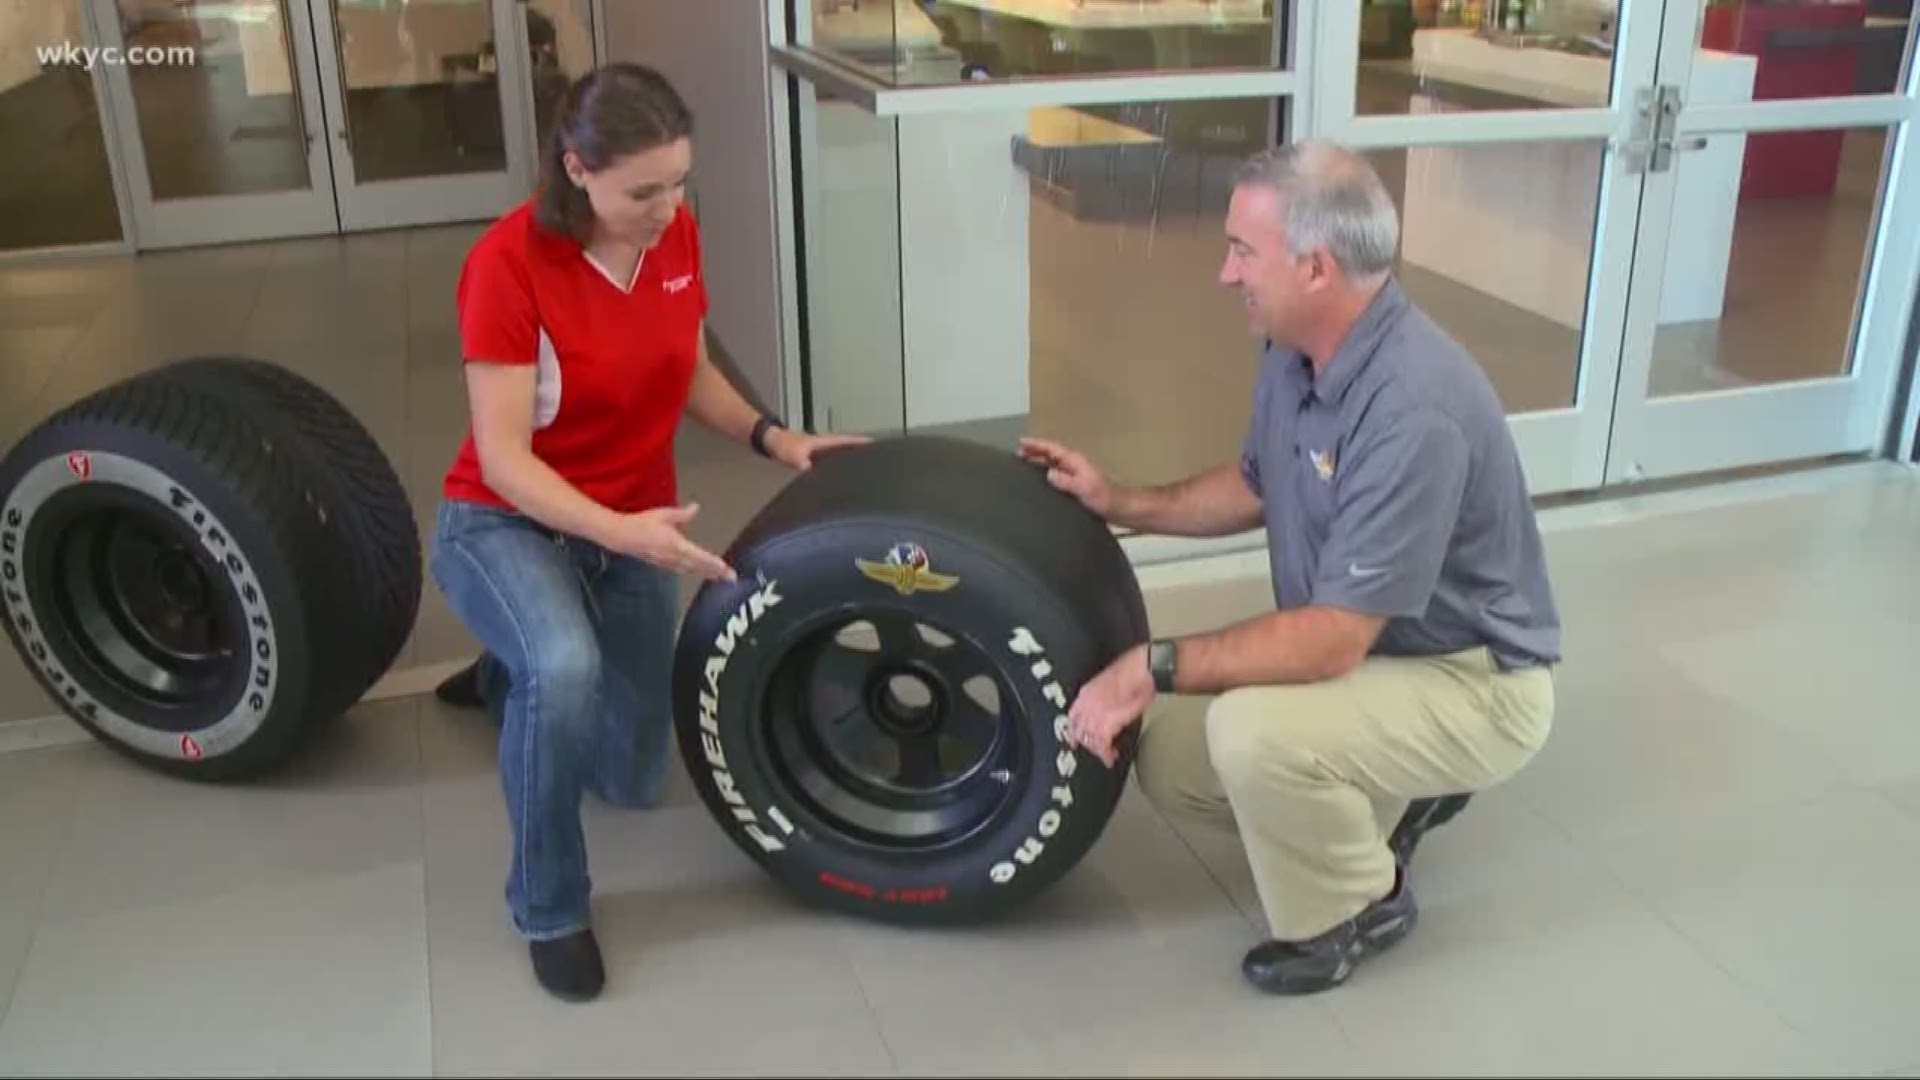 Girls in STEM: A lot of science in making tires